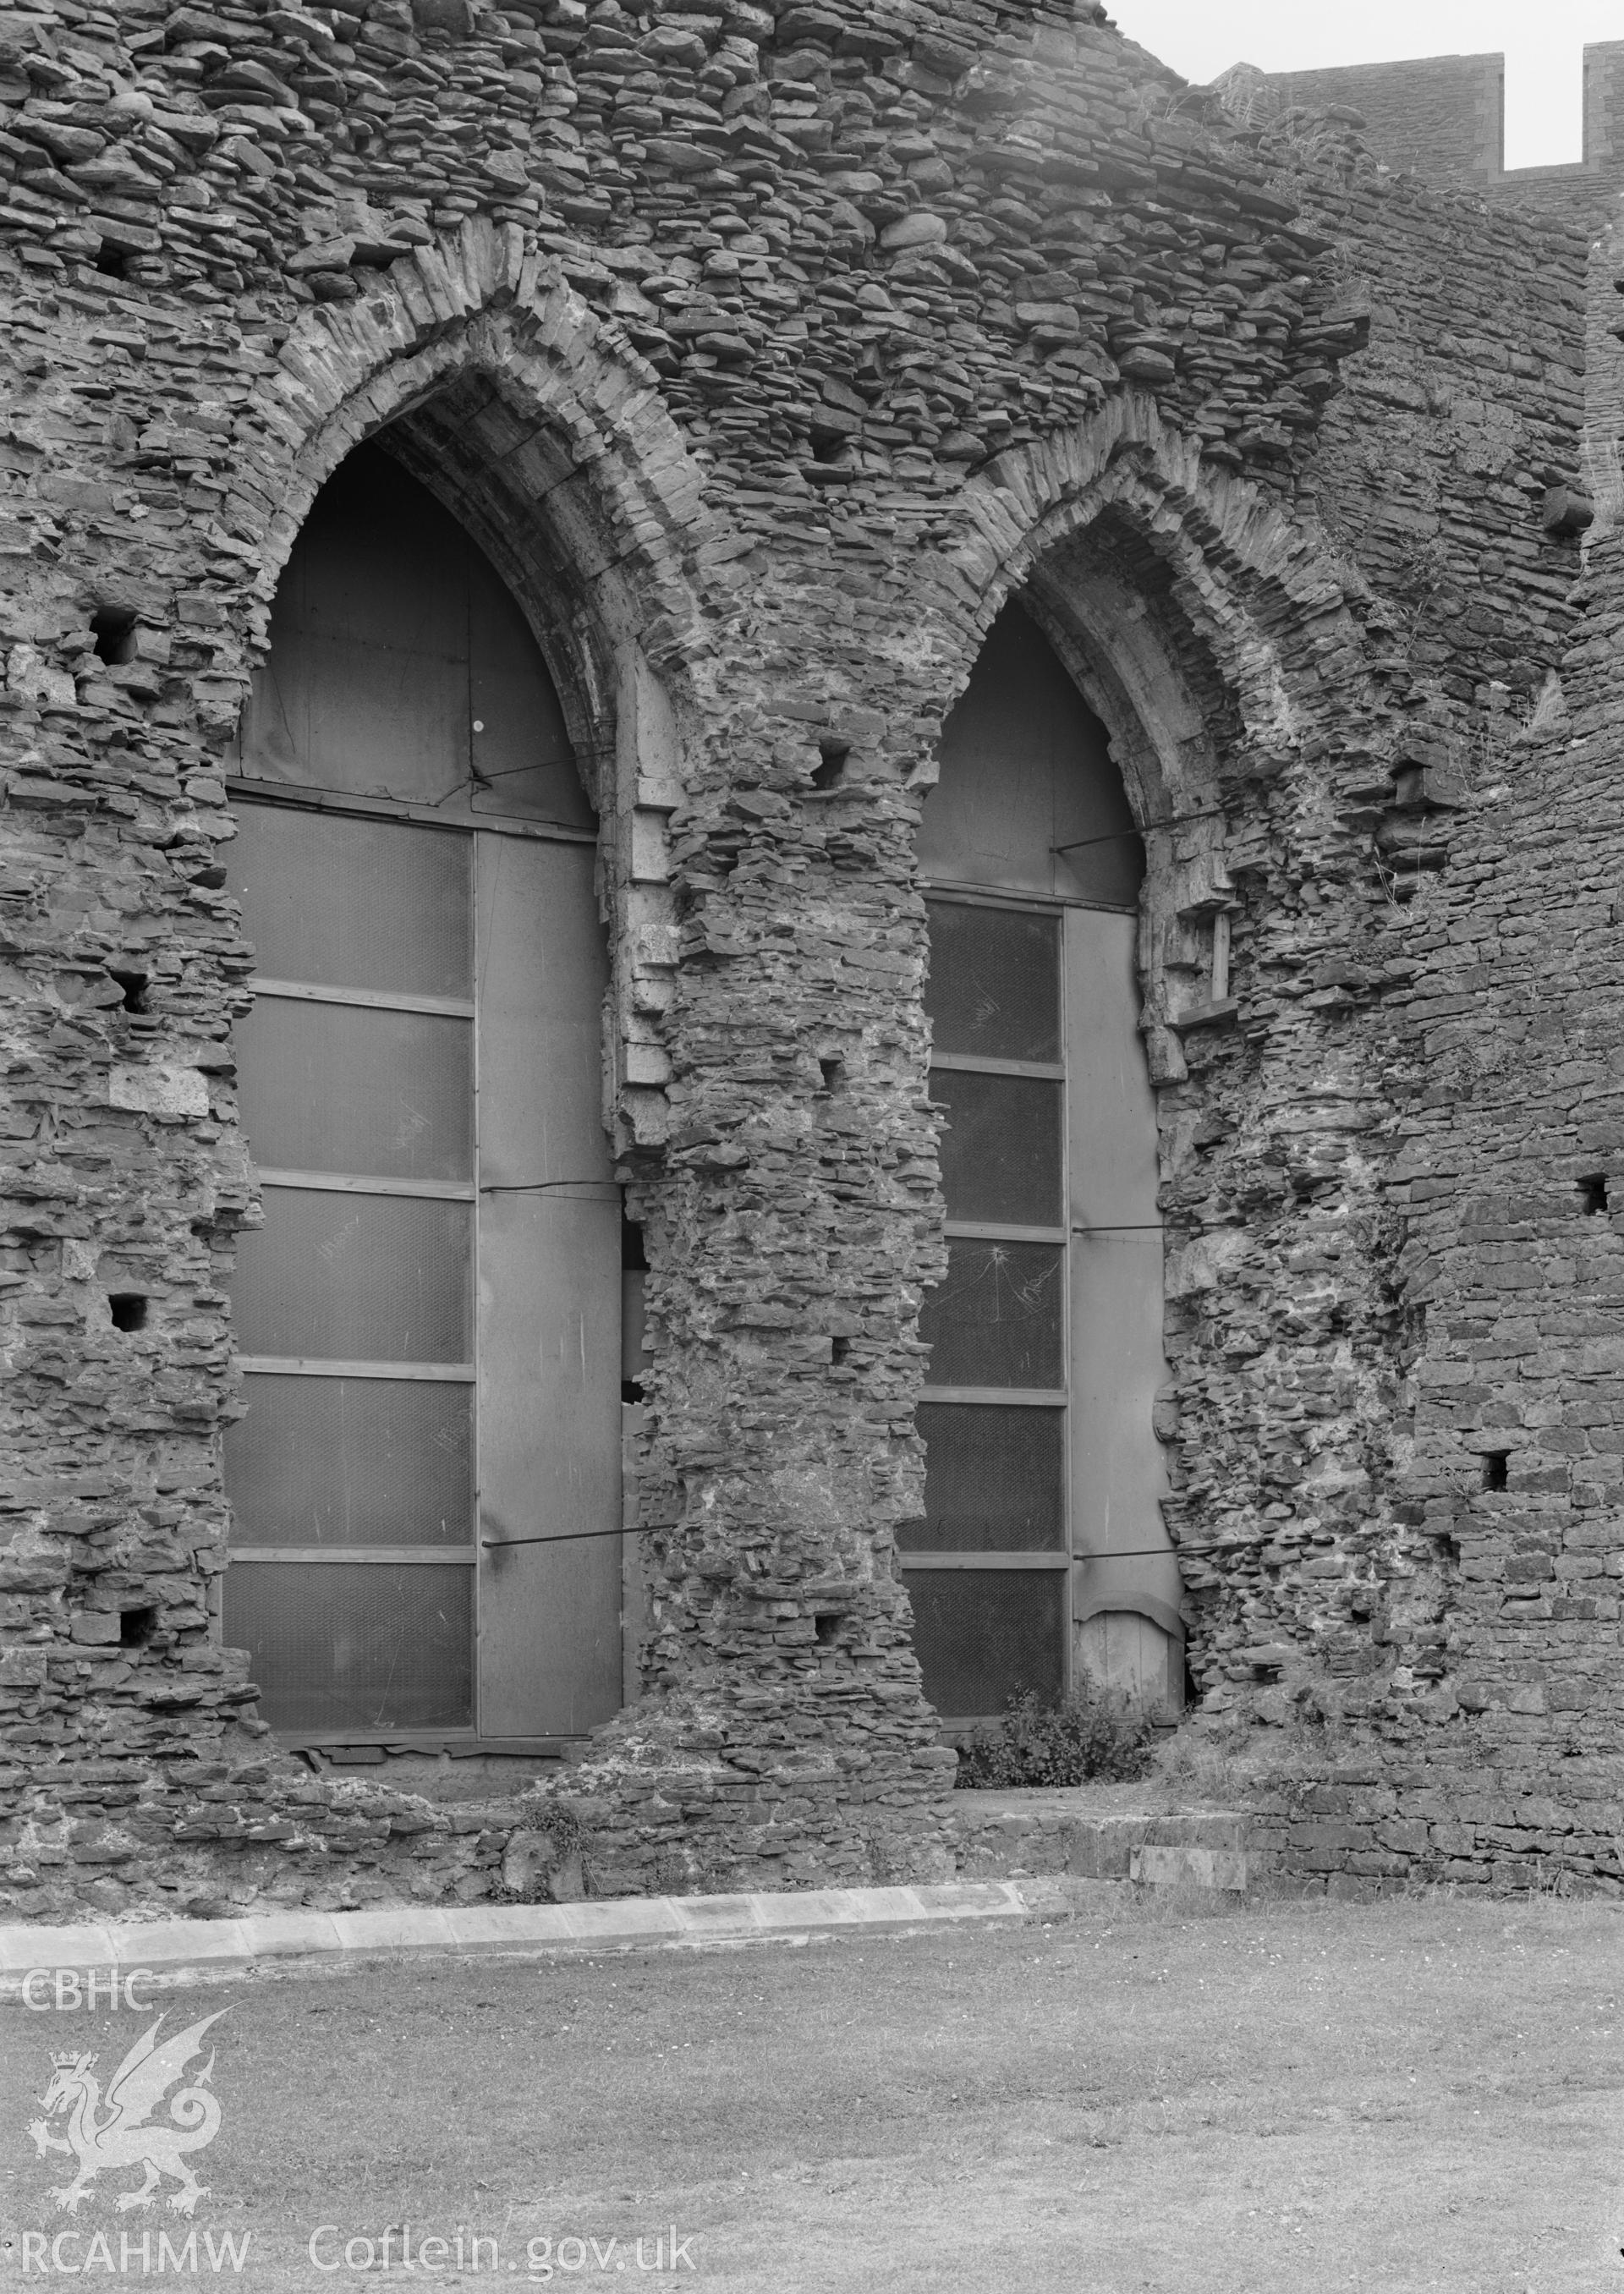 D.O.E photographs of Caerphilly Castle - external view of windows Nos 1 & 2 of Hall, from the north east.